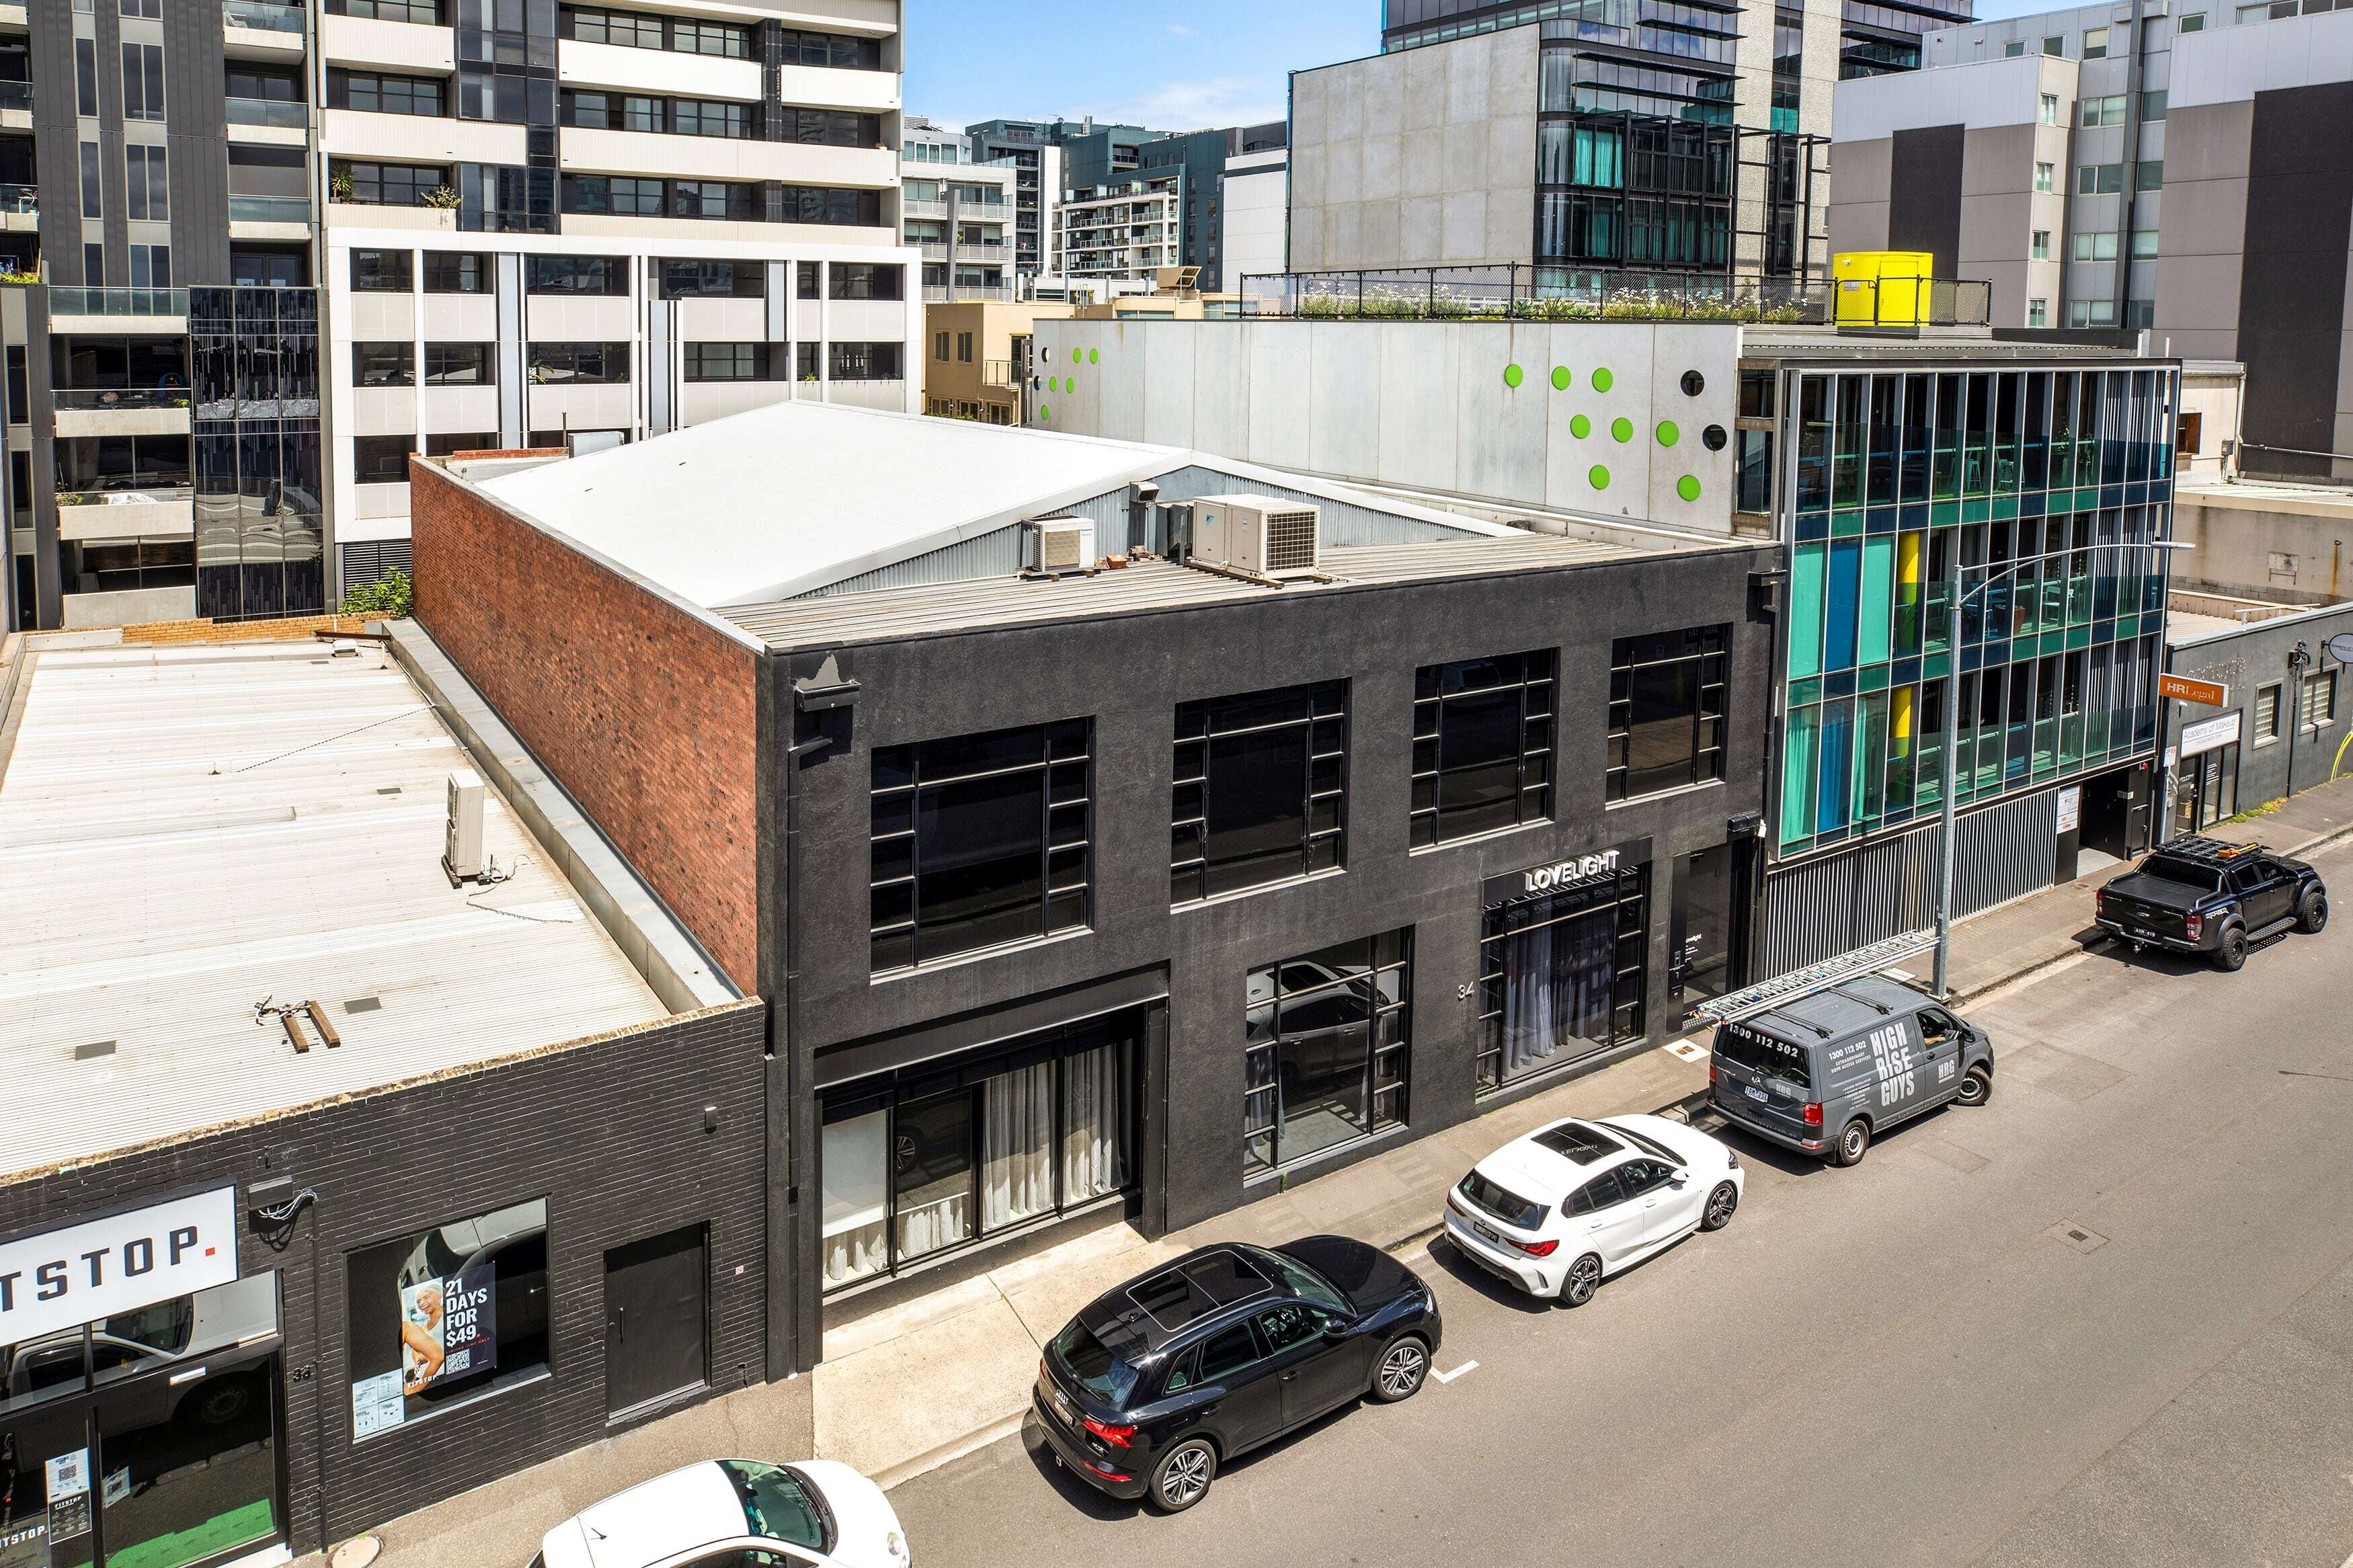 Remarkable result for commercial building amid transformative period for South Yarra